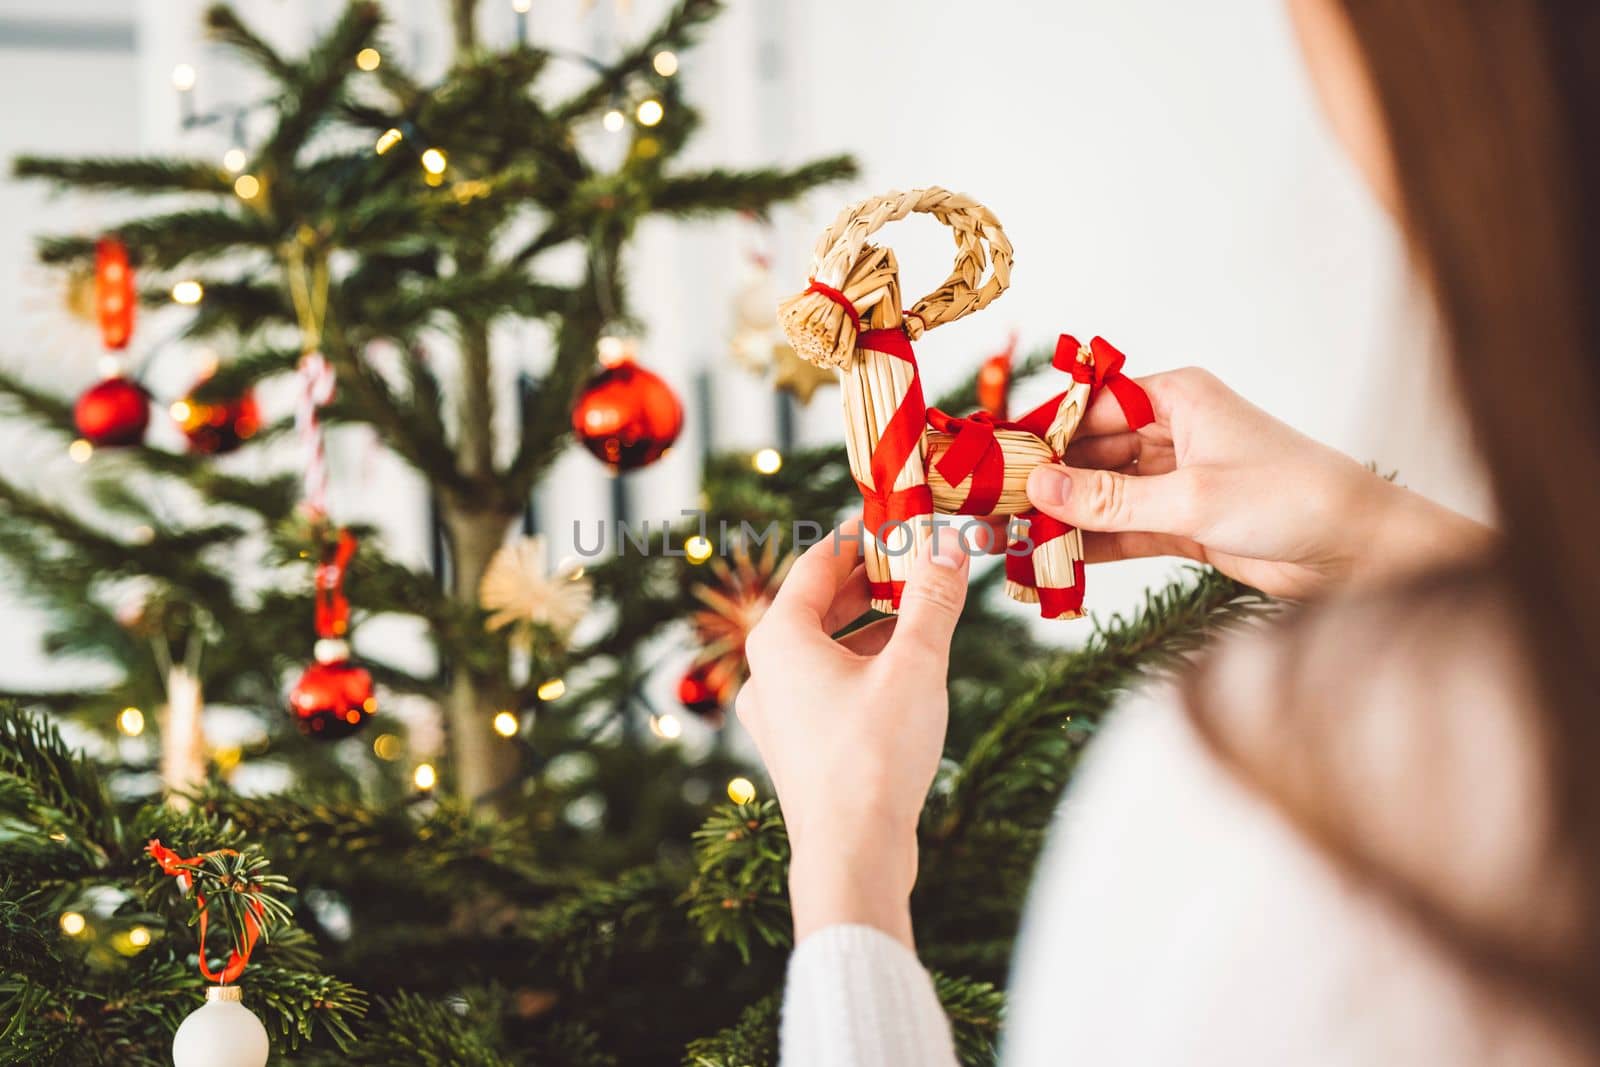 Unrecognizable caucasian woman decorating the Christmas tree, putting red ornament on the tree, holding a red Christmas ornament.